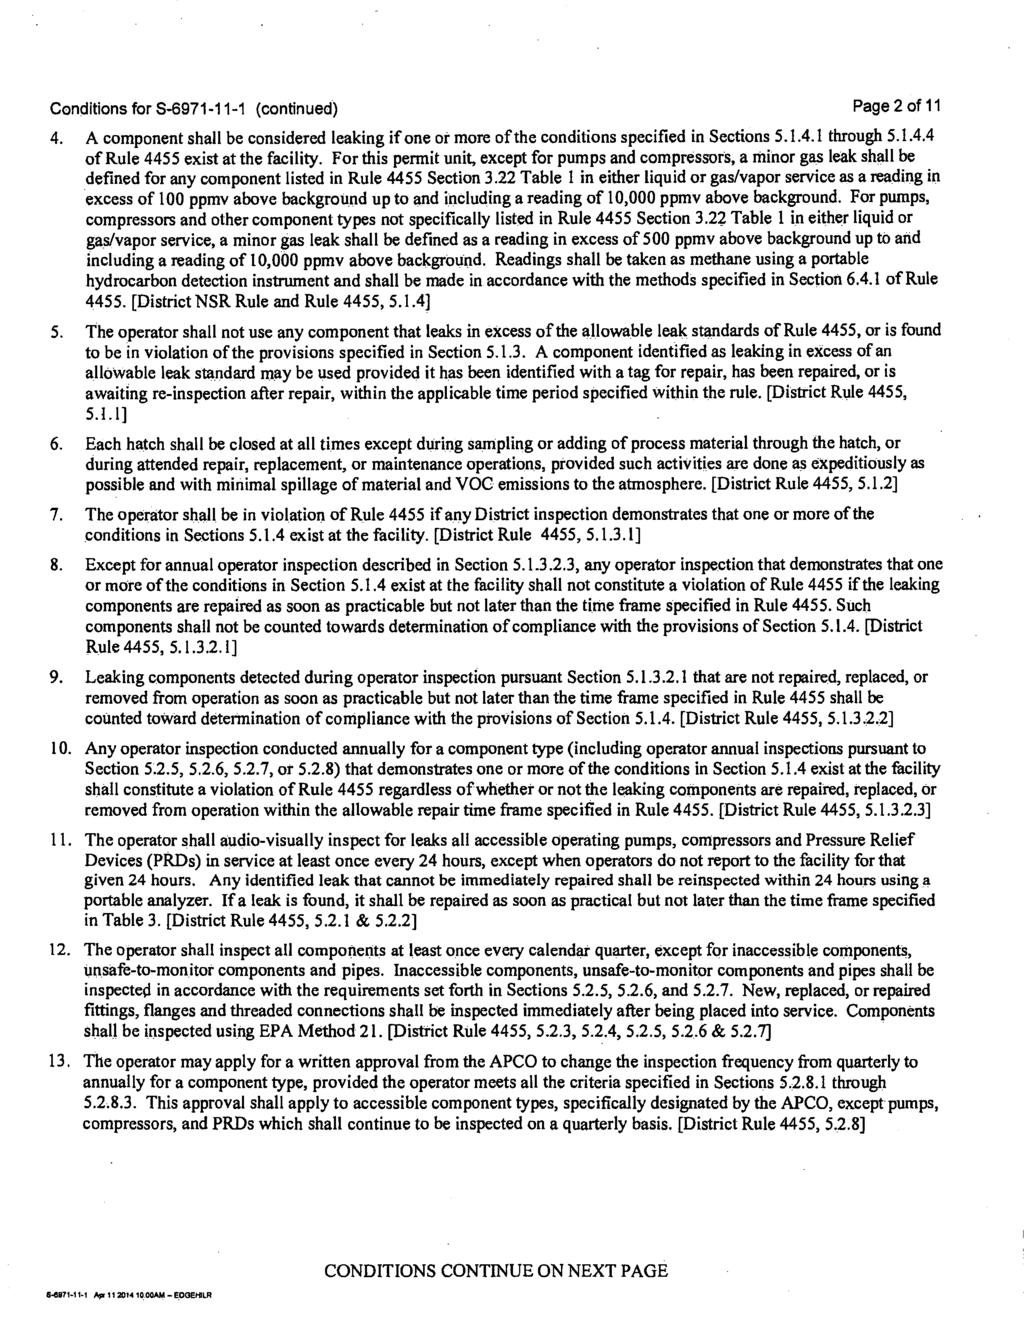 Conditions for 8-6971-11-1 (continued) Page 2 of 11 4. A component shall be considered leaking if one or more of the conditions specified in Sections 5.1.4.1 through 5.1.4.4 of Rule 4455 exist at the facility.